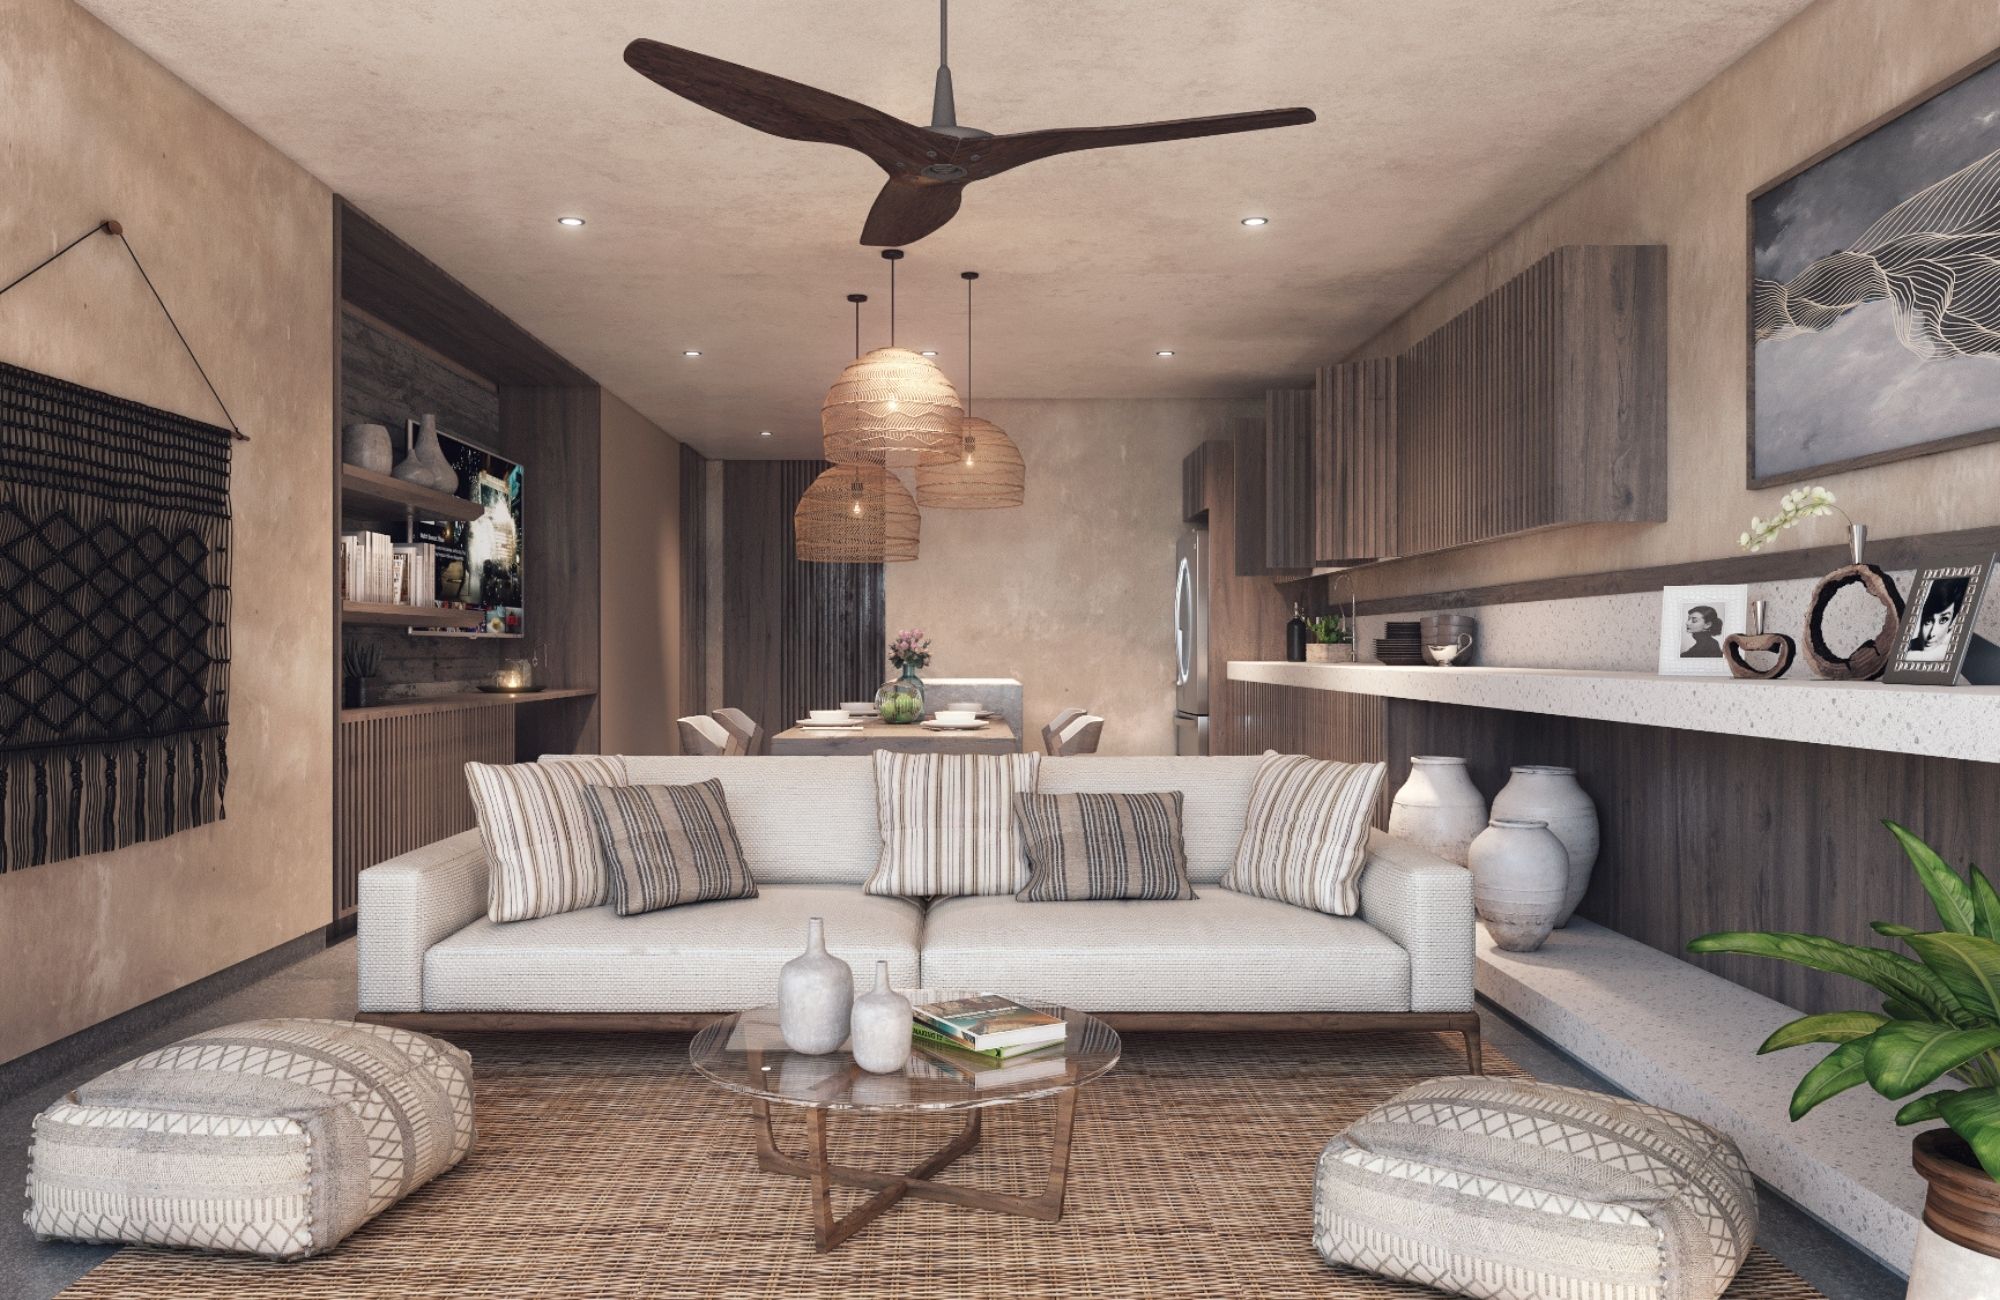 Modern condo with amenities, Tesla charger and dron for passengers